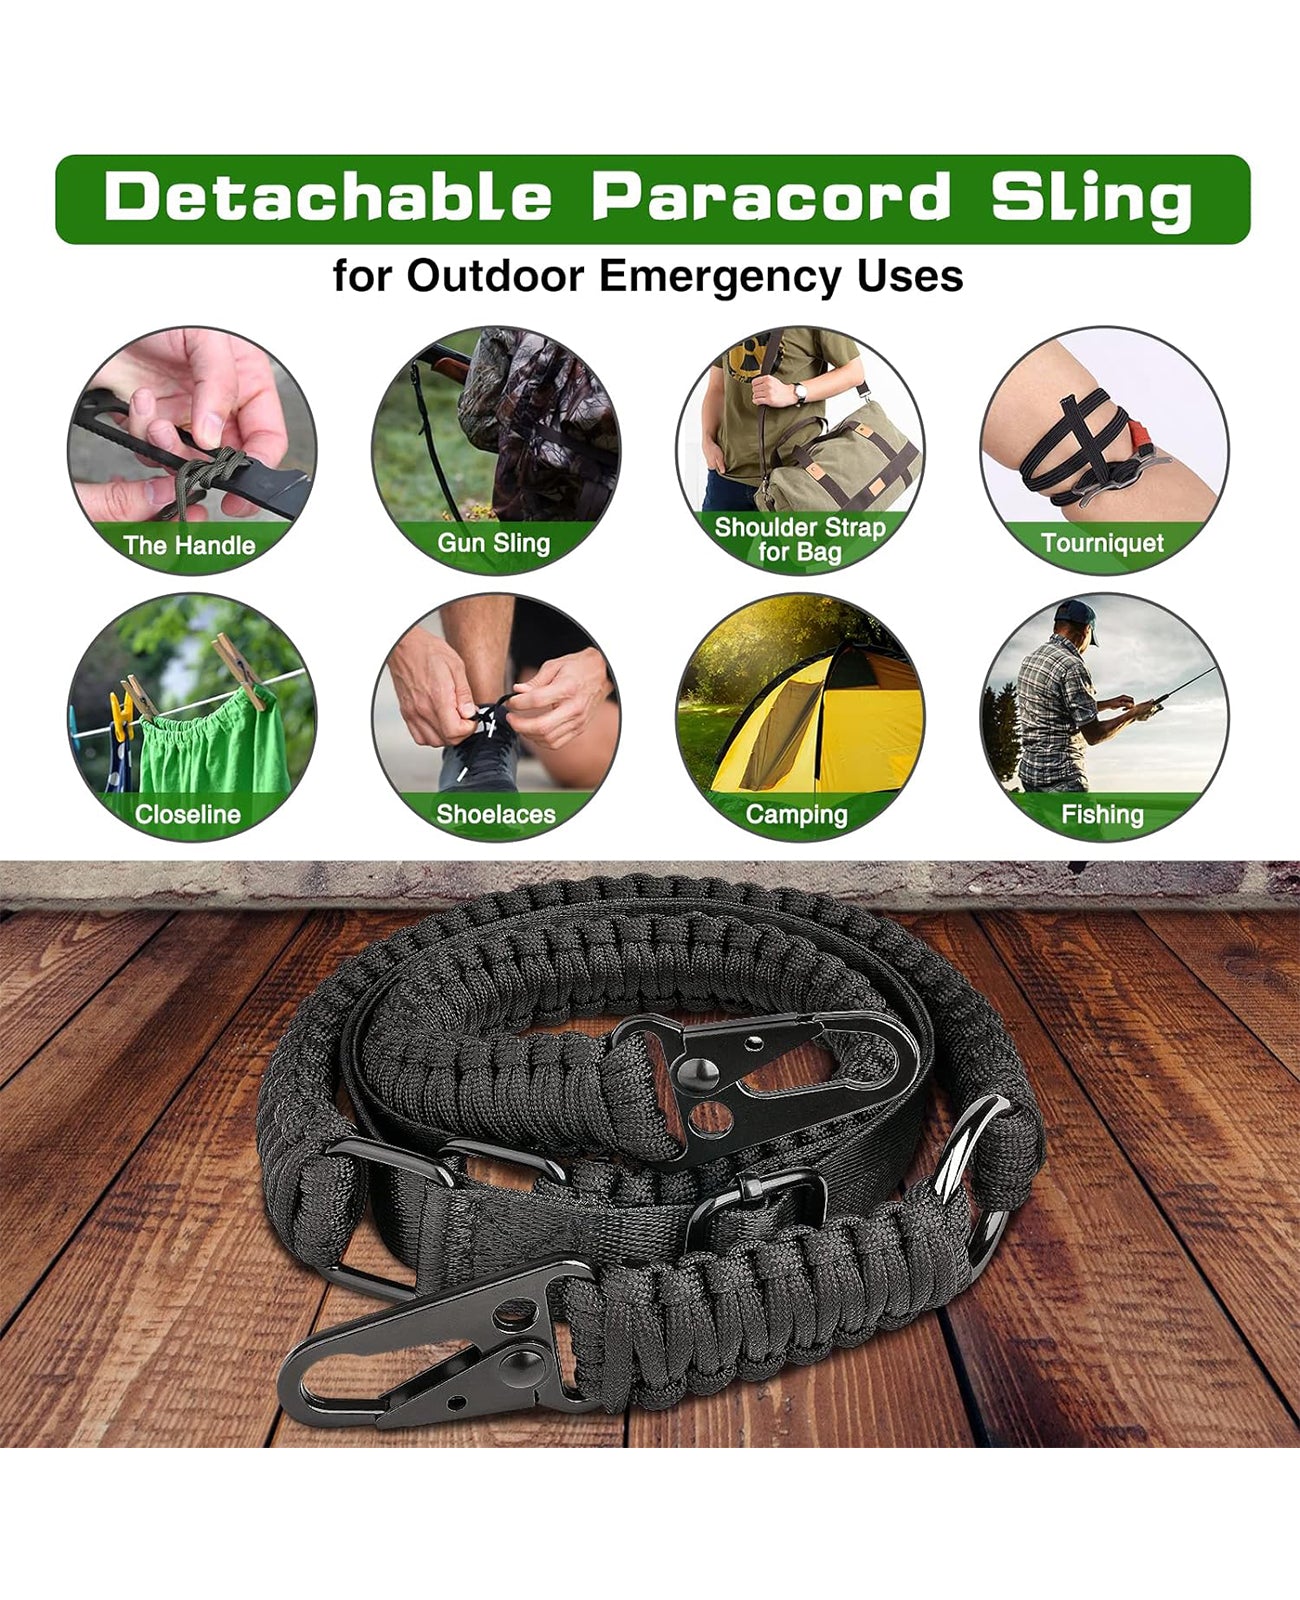 Detachable Paracord Sling for Outdoor Emergency Use